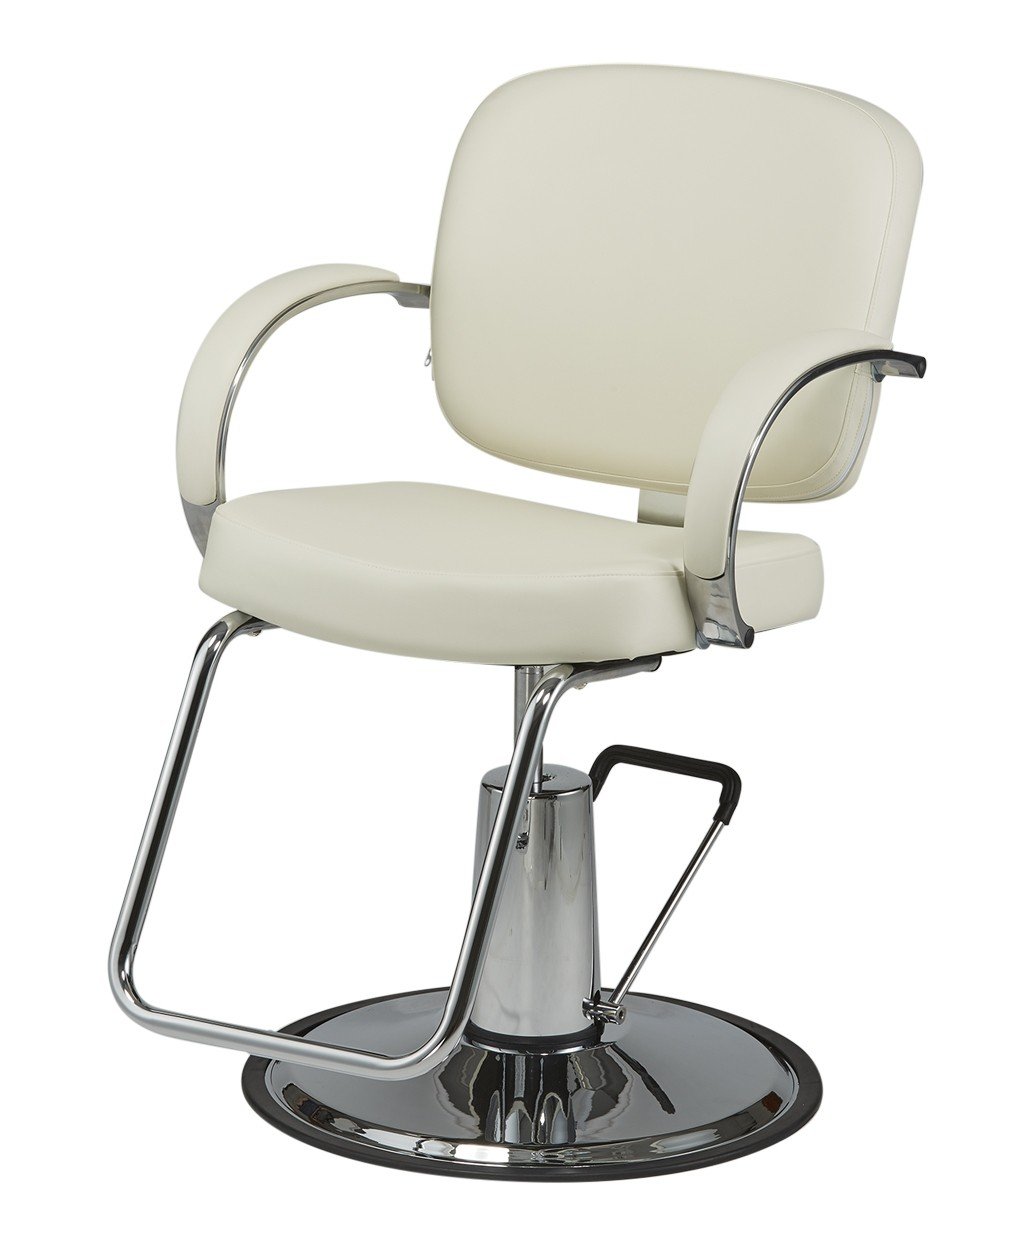 Best Salon Chairs The Top 9 Styling Chairs For Salons In 2019